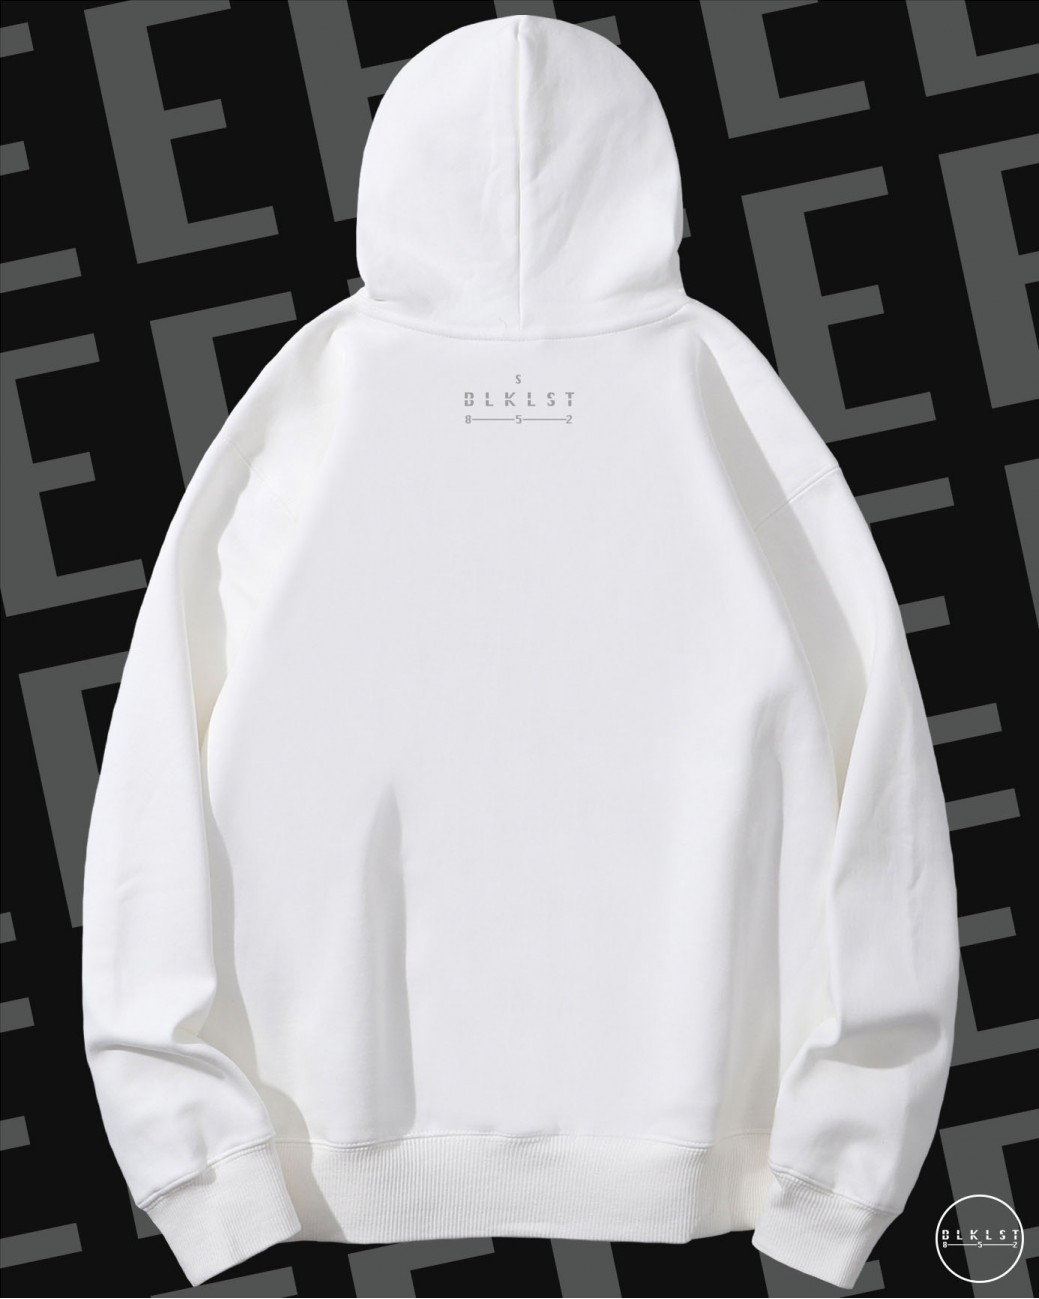 LETTER E HOODIE